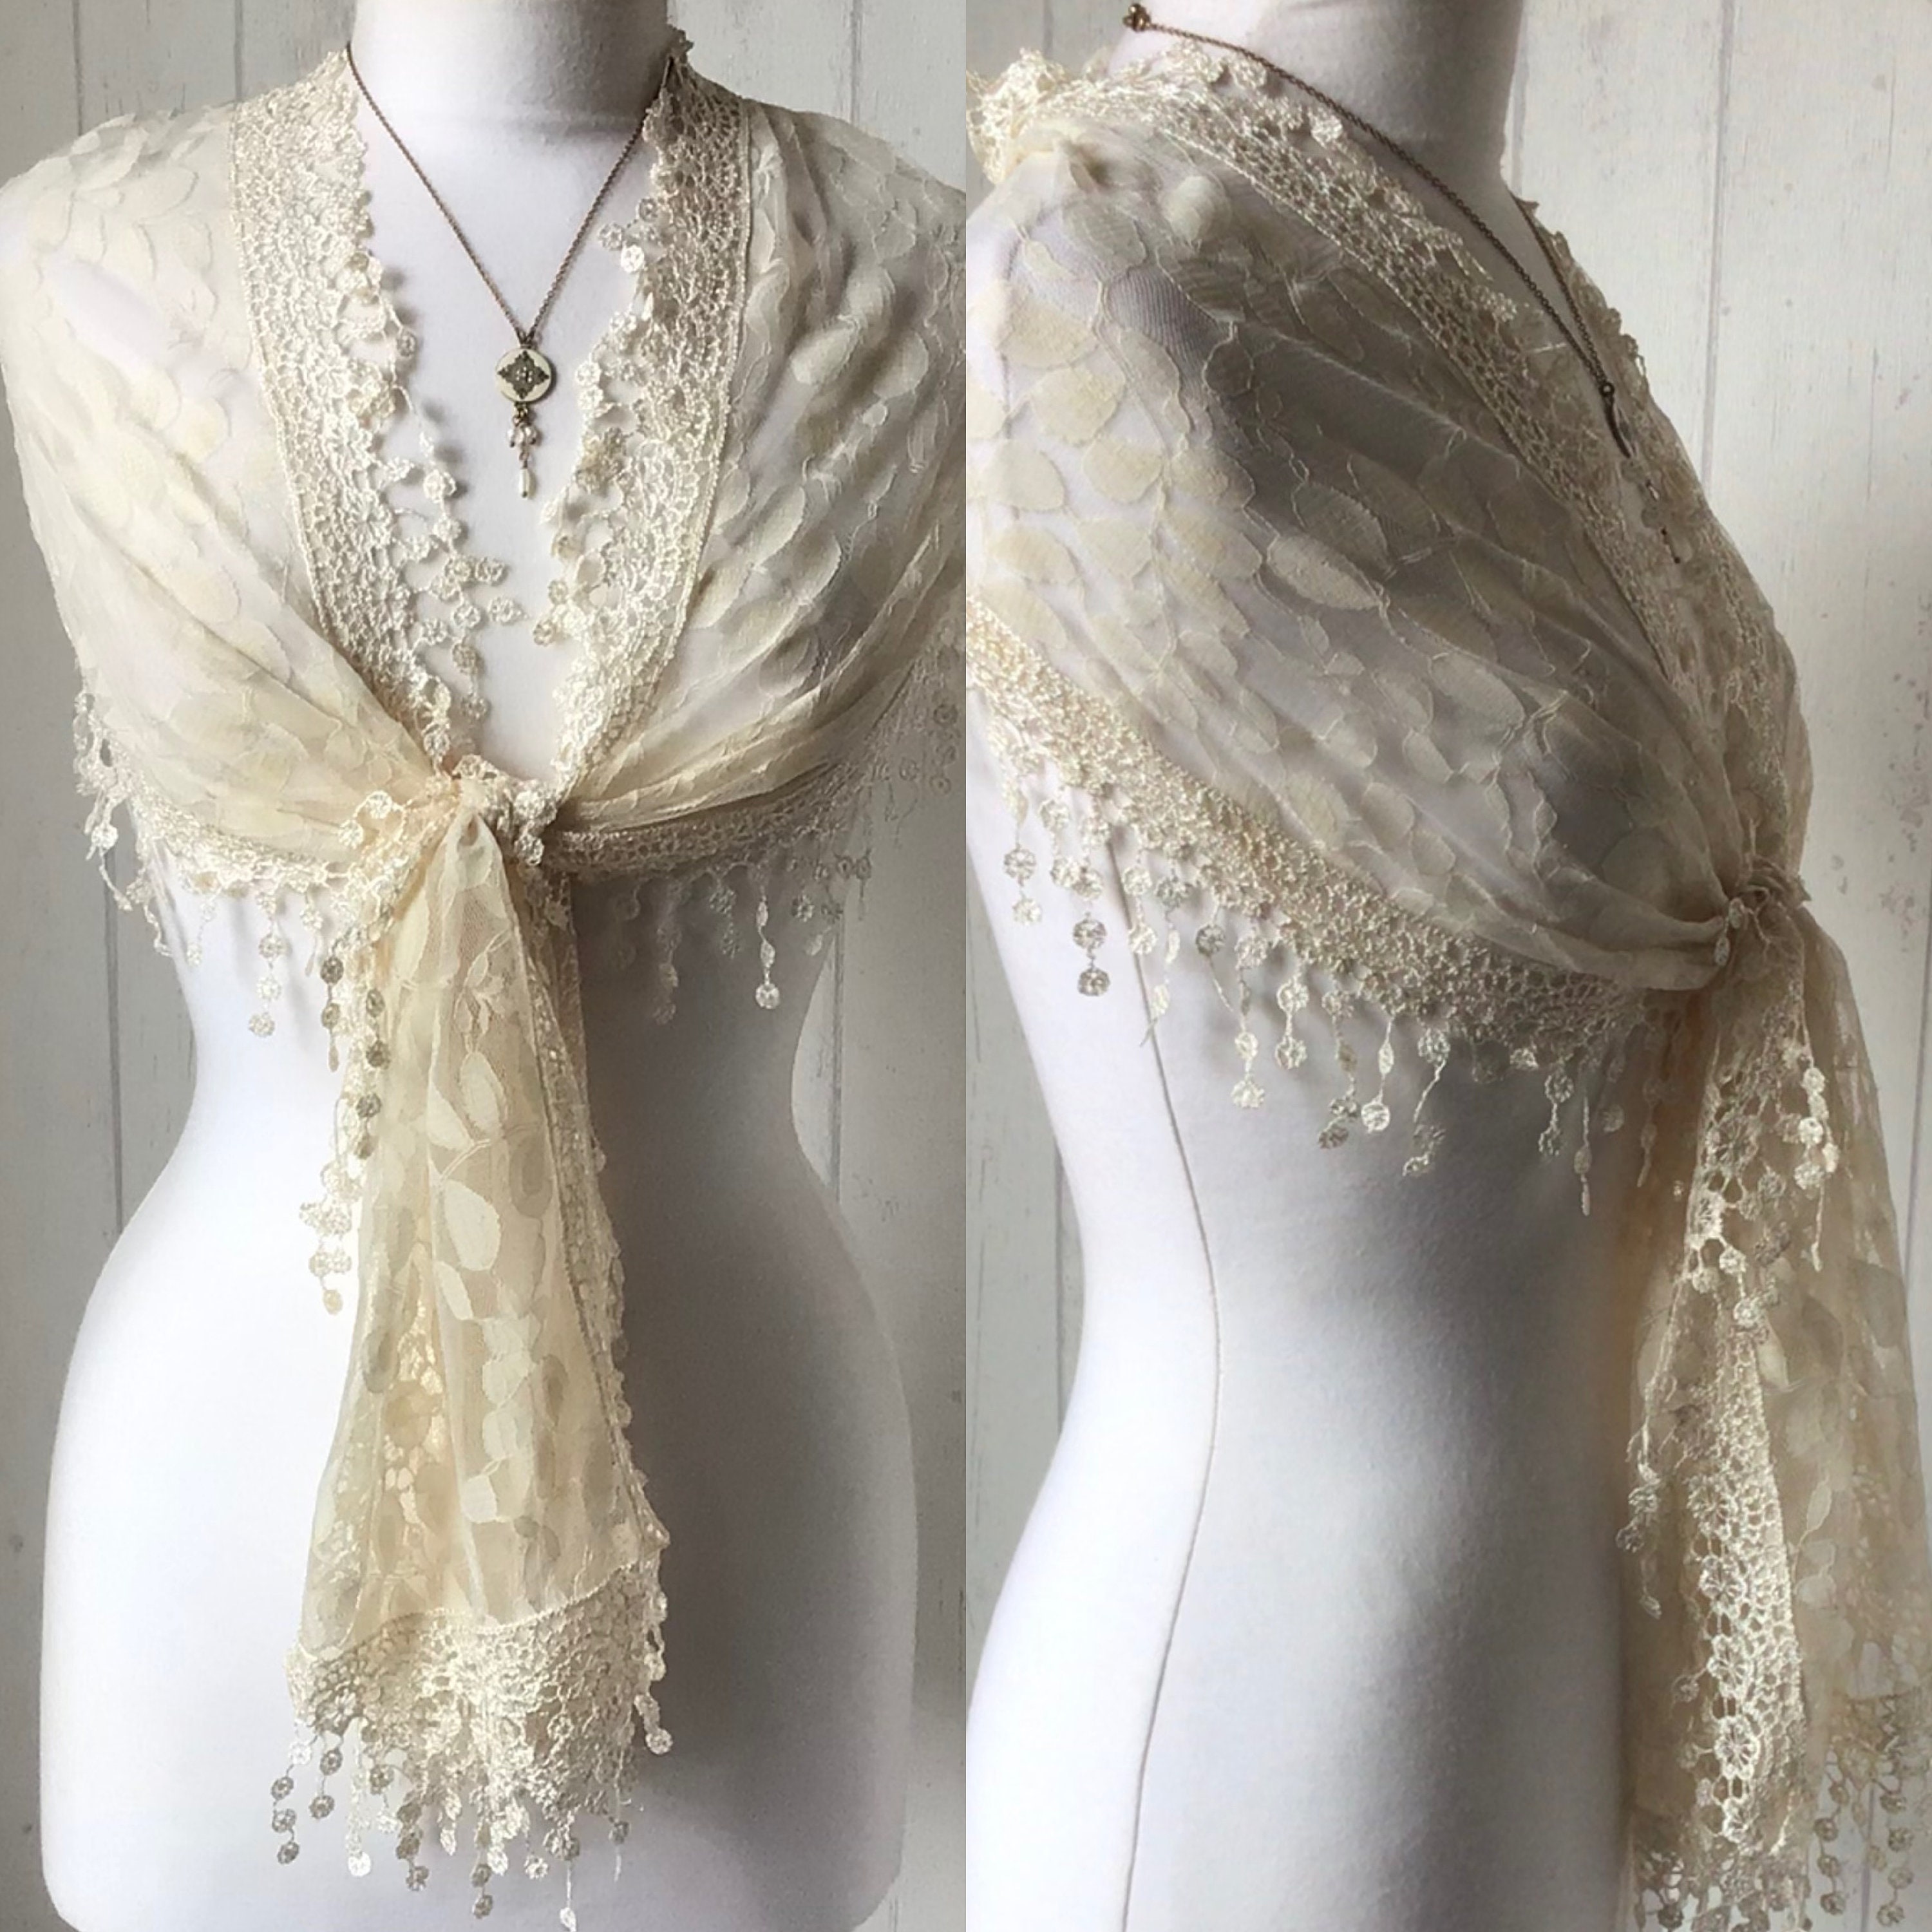 Beautiful Lace Wrap with Sleeves_Fringe Accents at Hemline_Color